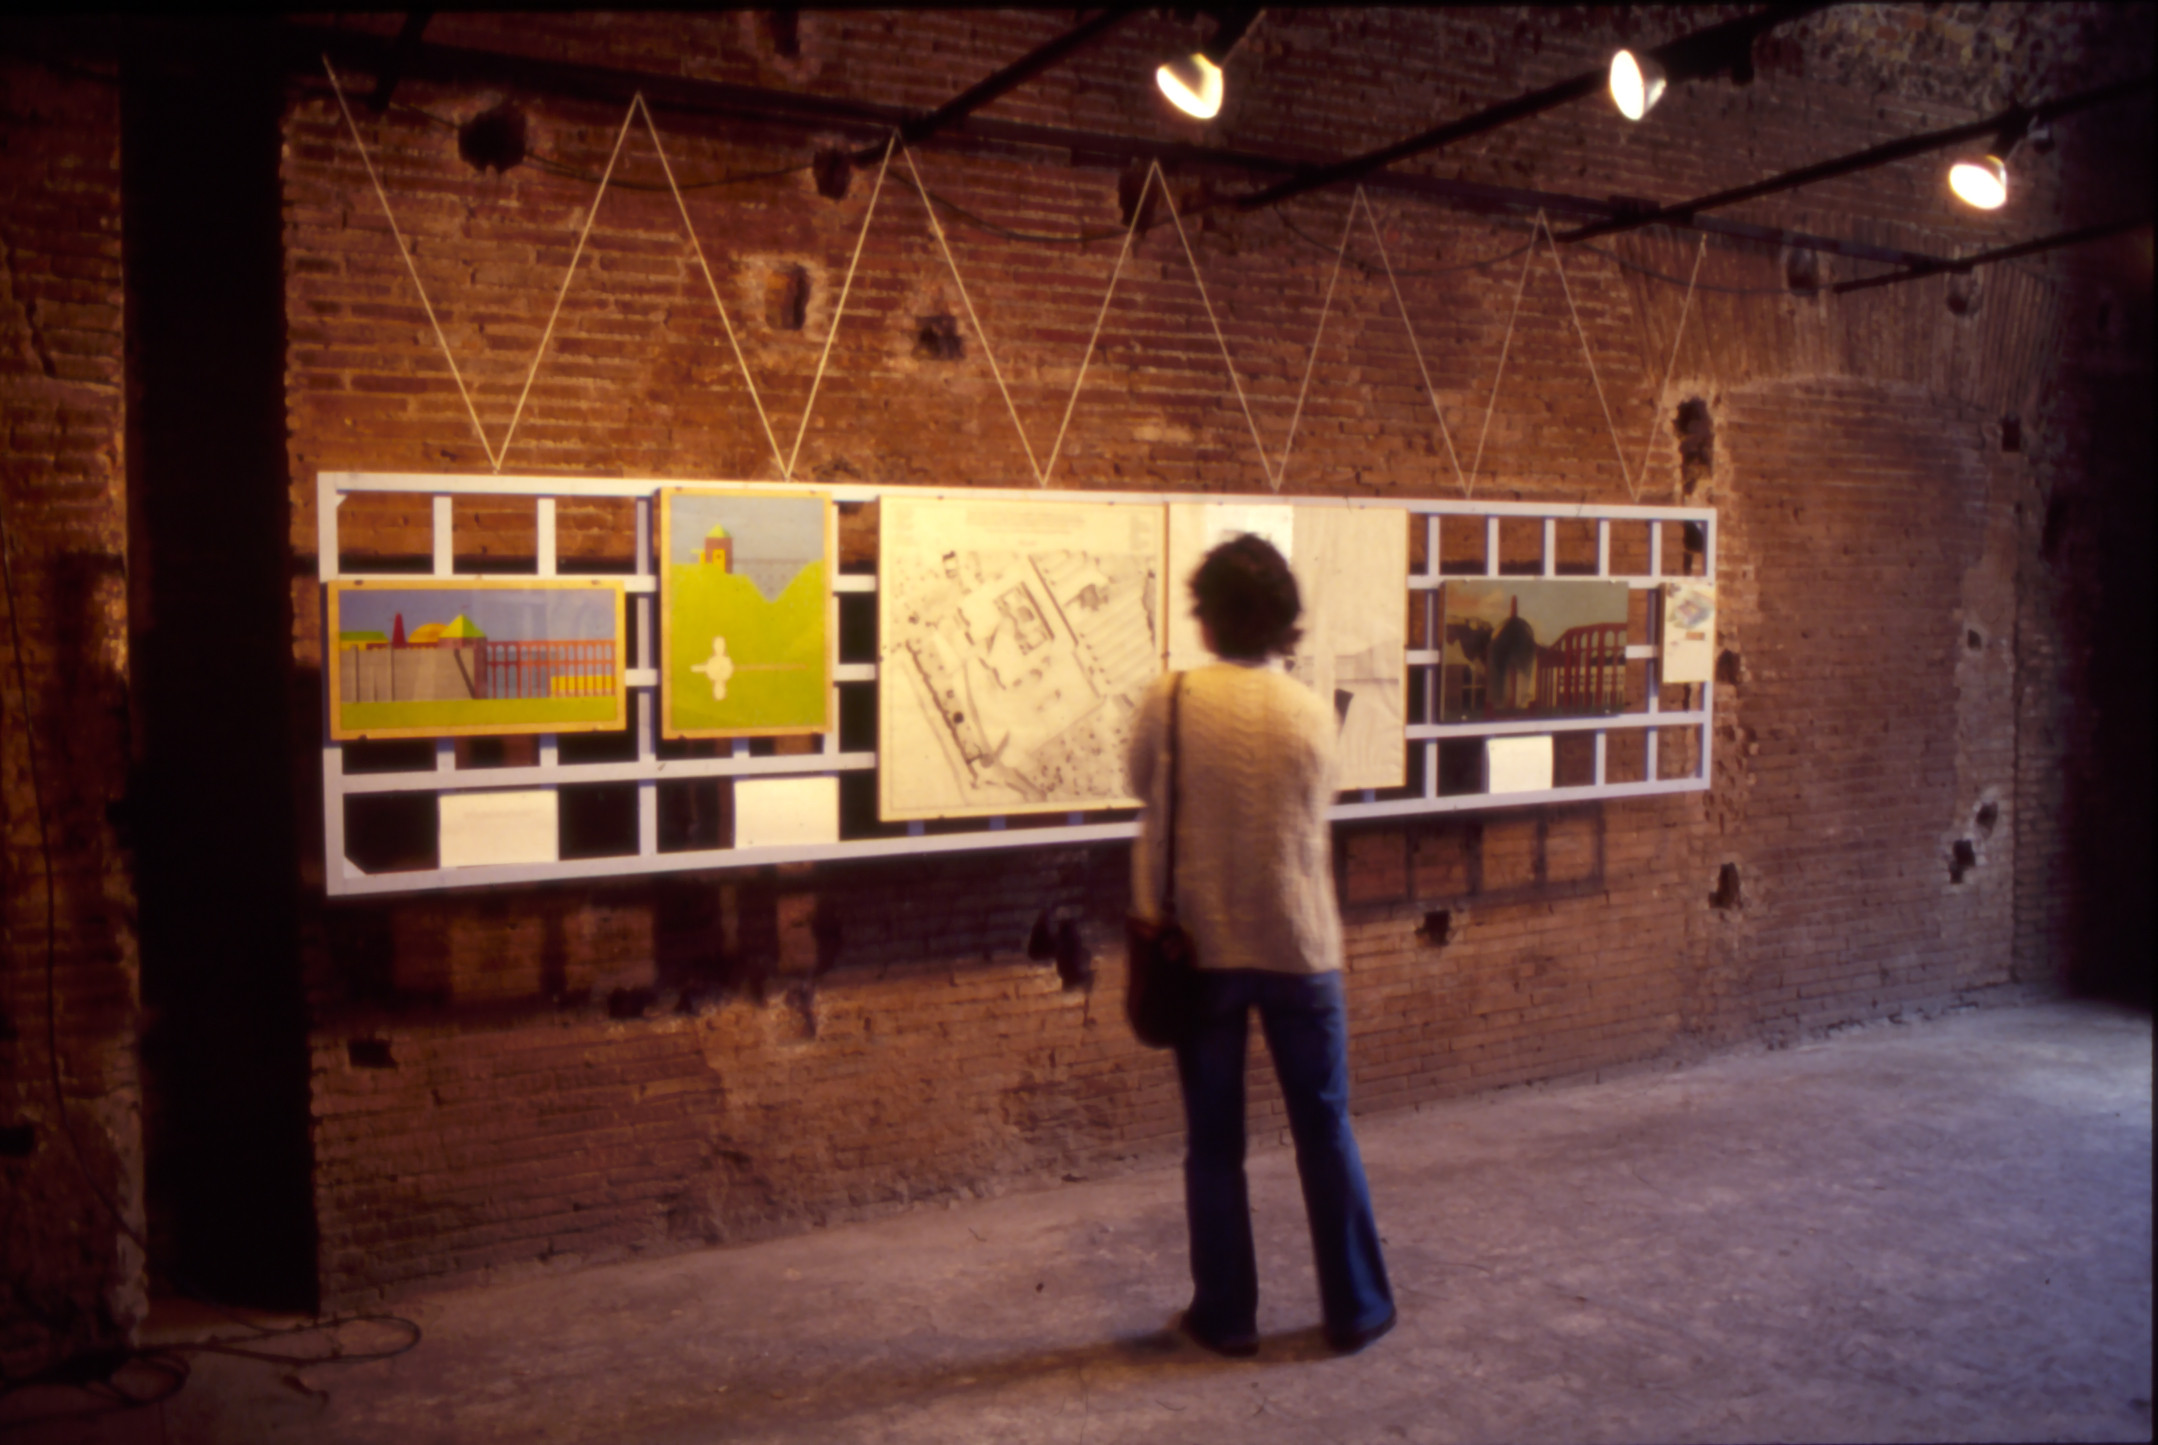 Exhibition of drawings on reticular structures in the workshops of the Mercati Traianei